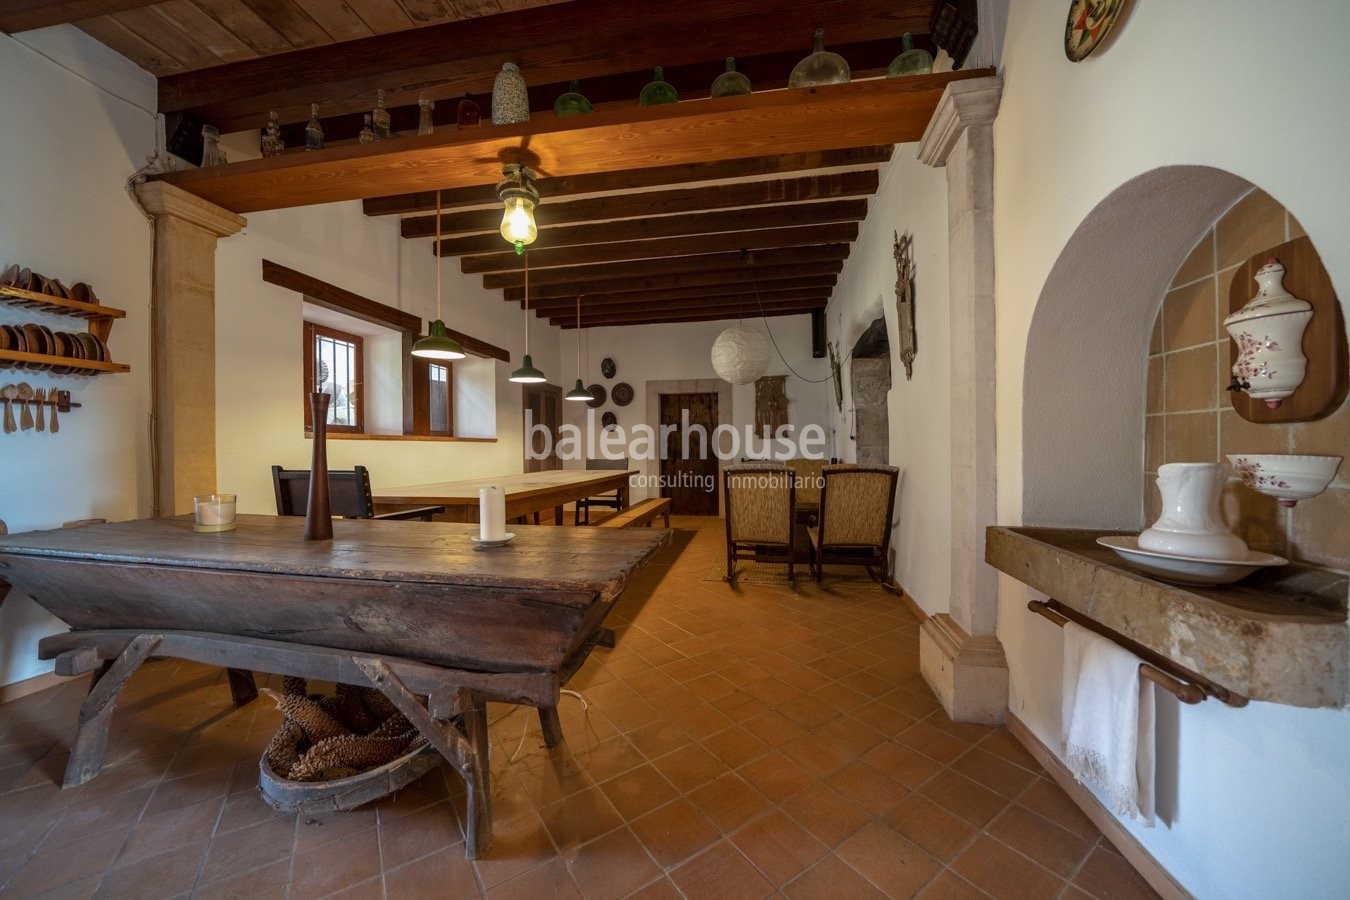 Fantastic rustic finca in the centre of Mallorca surrounded by a large plot of land nature.